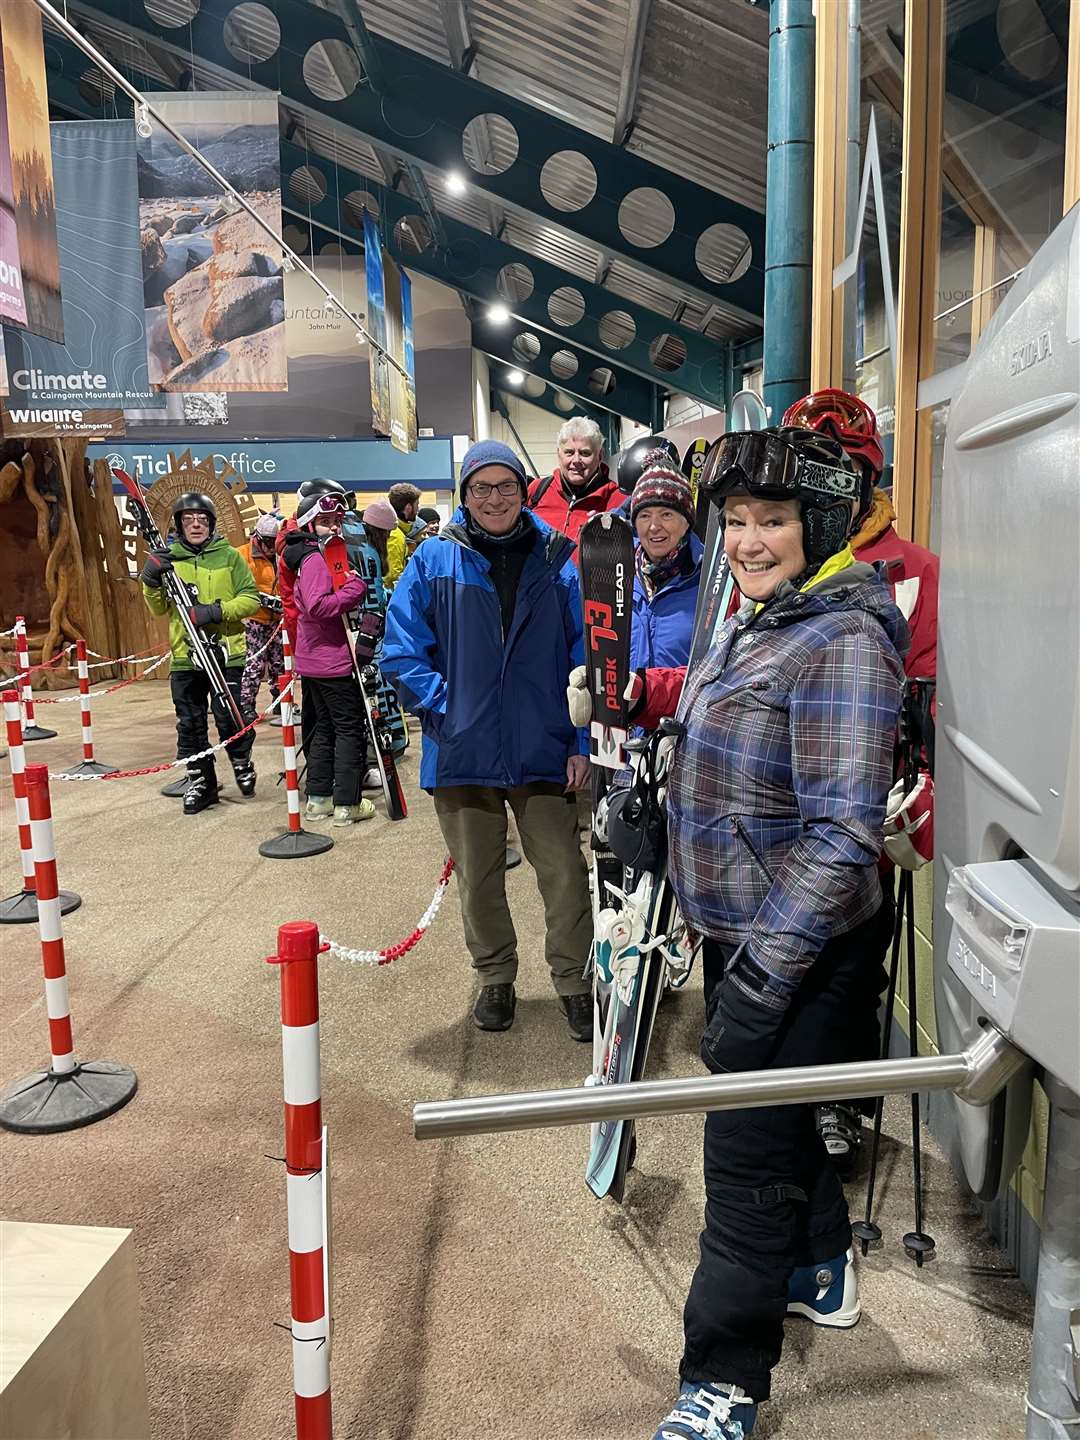 Making their own lilttle piece of Cairngorm history. The first snowsports enthusiasts to ride on the funicular's journey to the top after its repair. Picture: Christine Butchart.